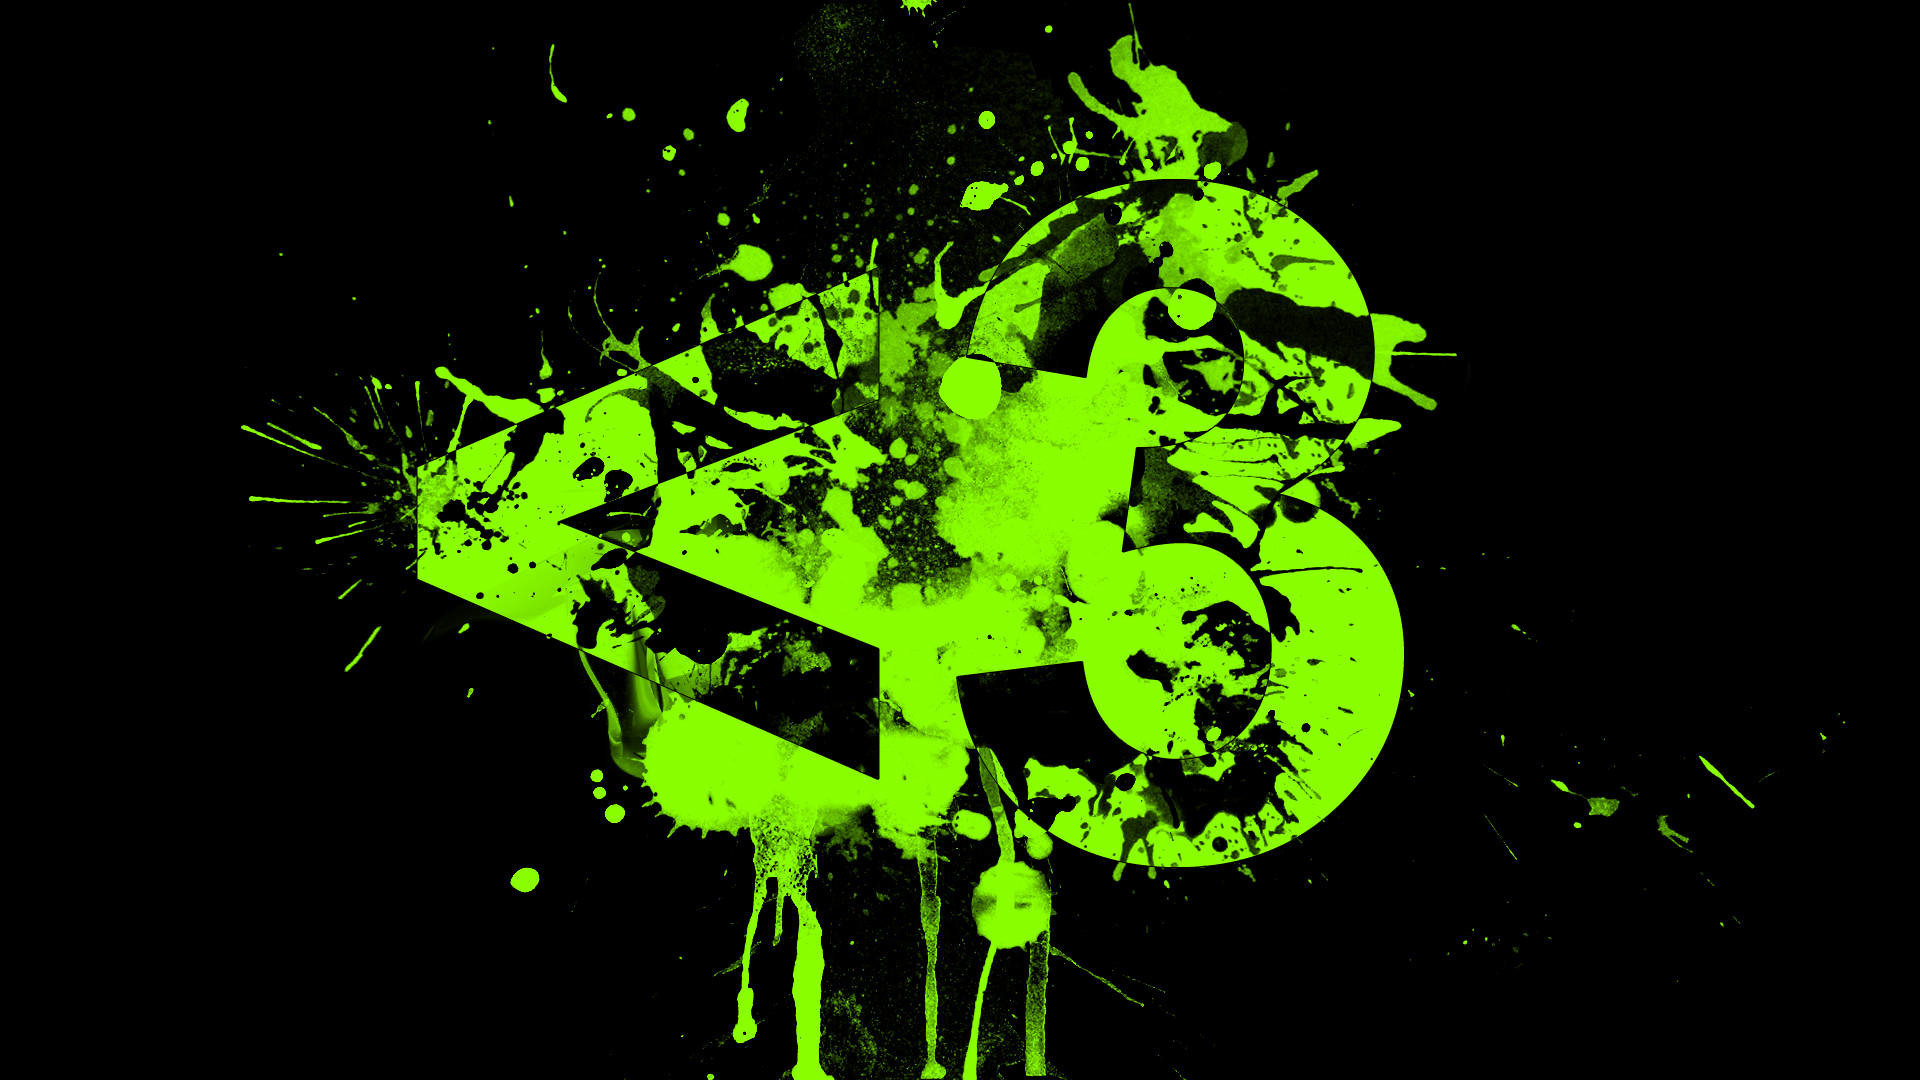 Black And Neon Green Wallpaper (77+ Images)